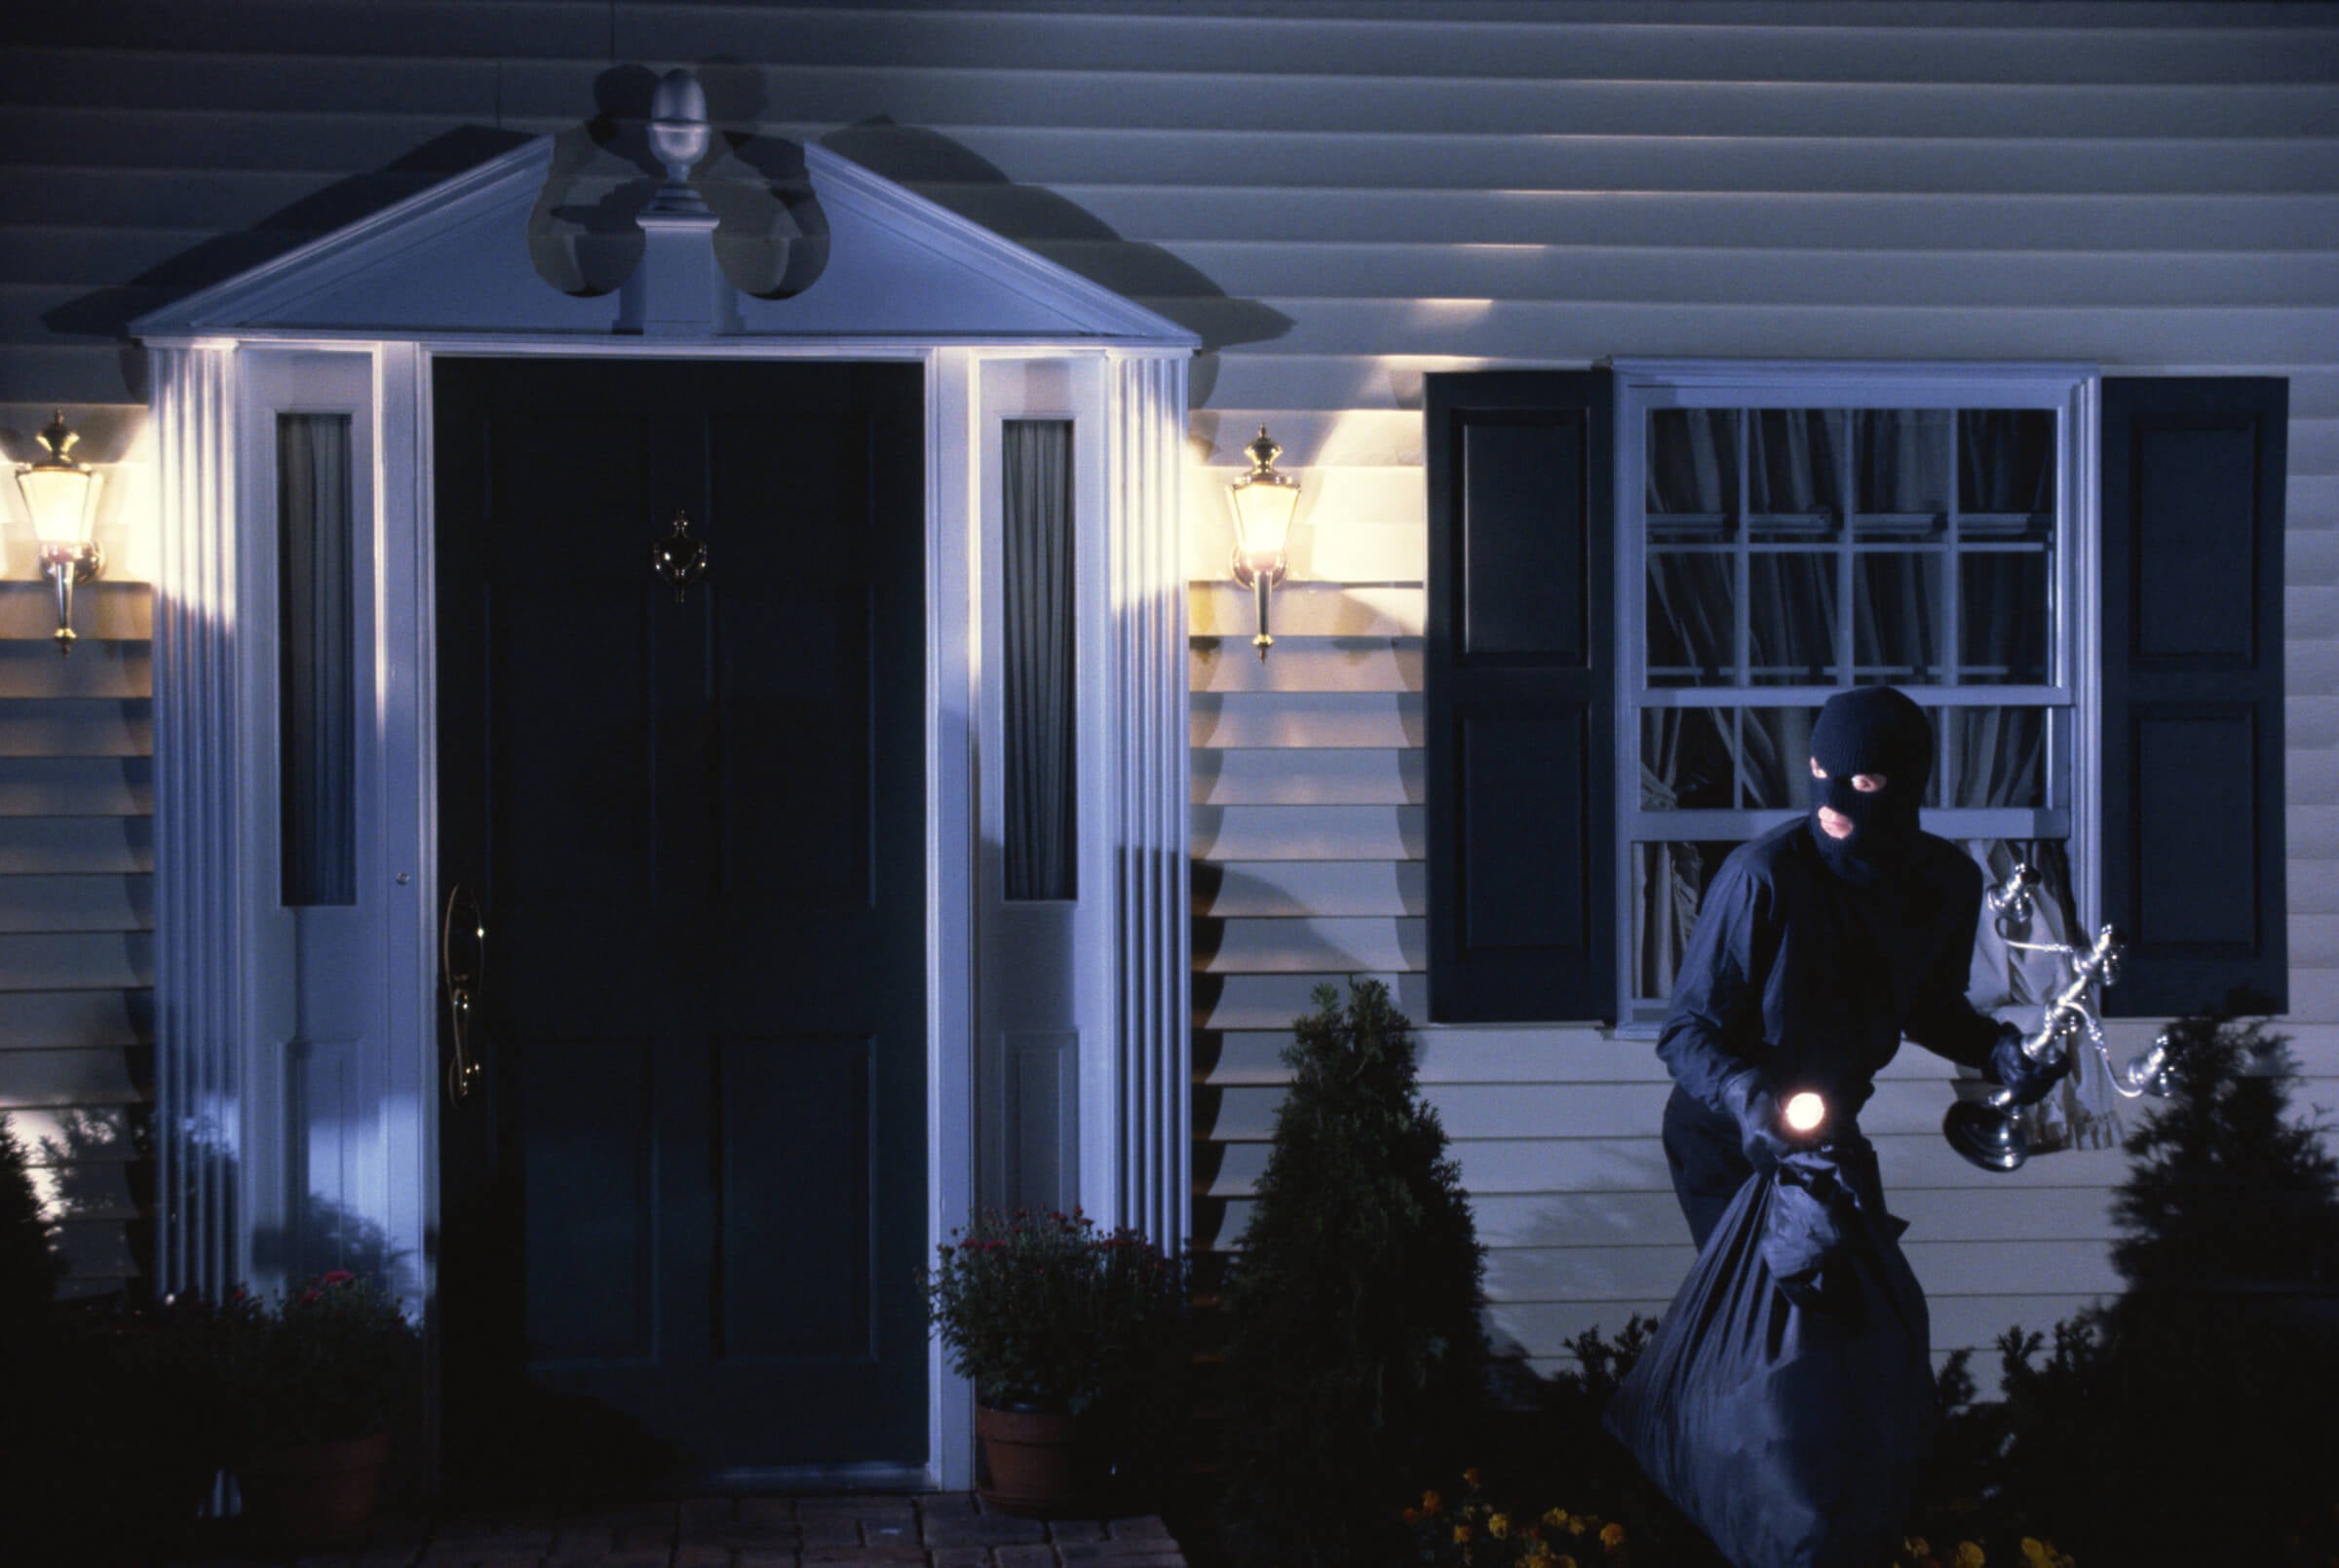 How to Prevent Home Invasion: 9 Ways to Enhance Security